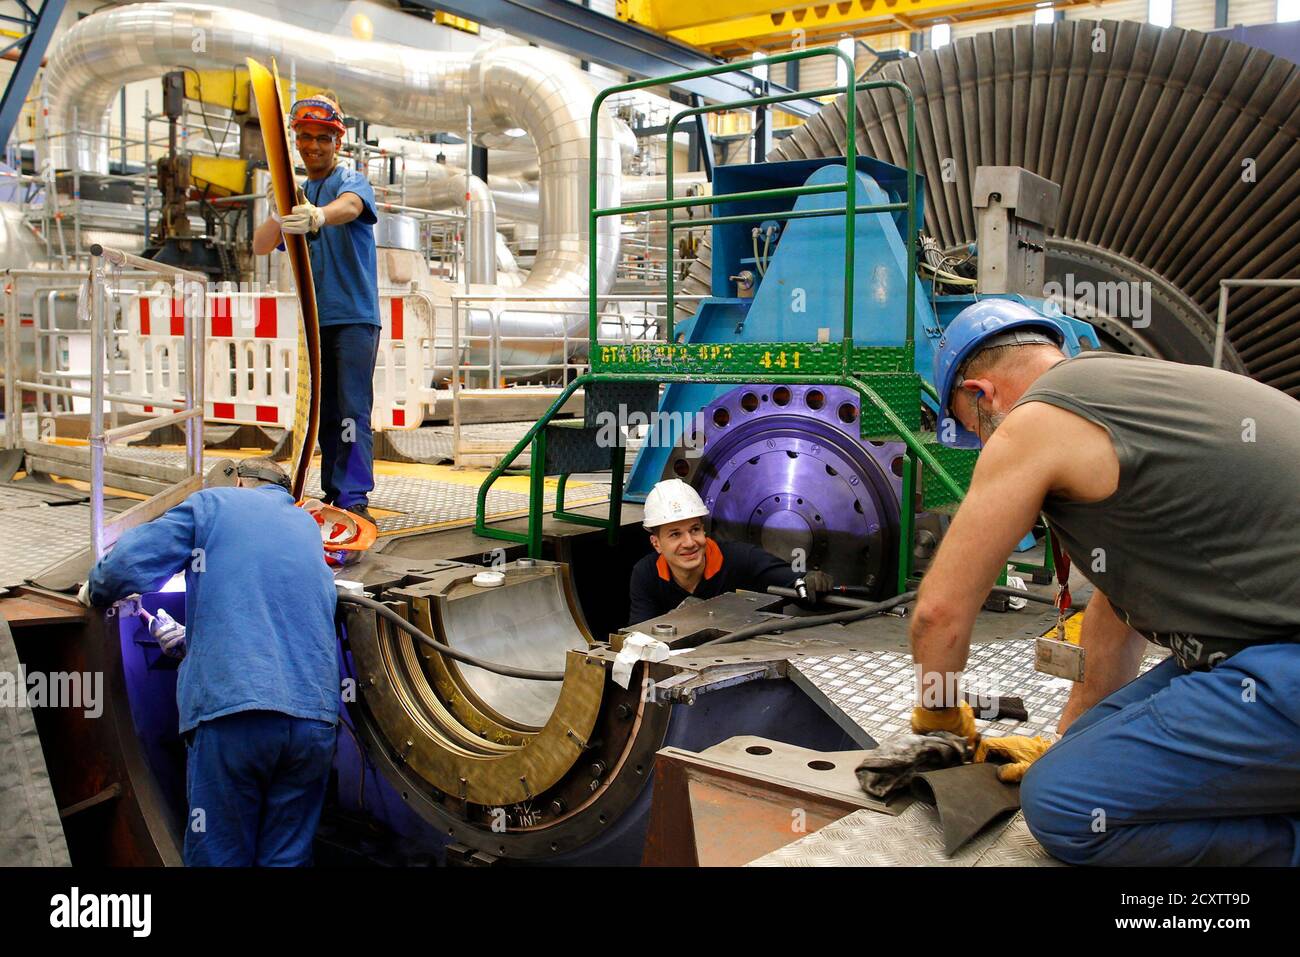 Technicians work near a turbine during a planned maintenance intervention at Bugey nuclear power plant in Saint-Vulbas, near Lyon April 19, 2011. Electricite de France (EDF) runs the country's nuclear